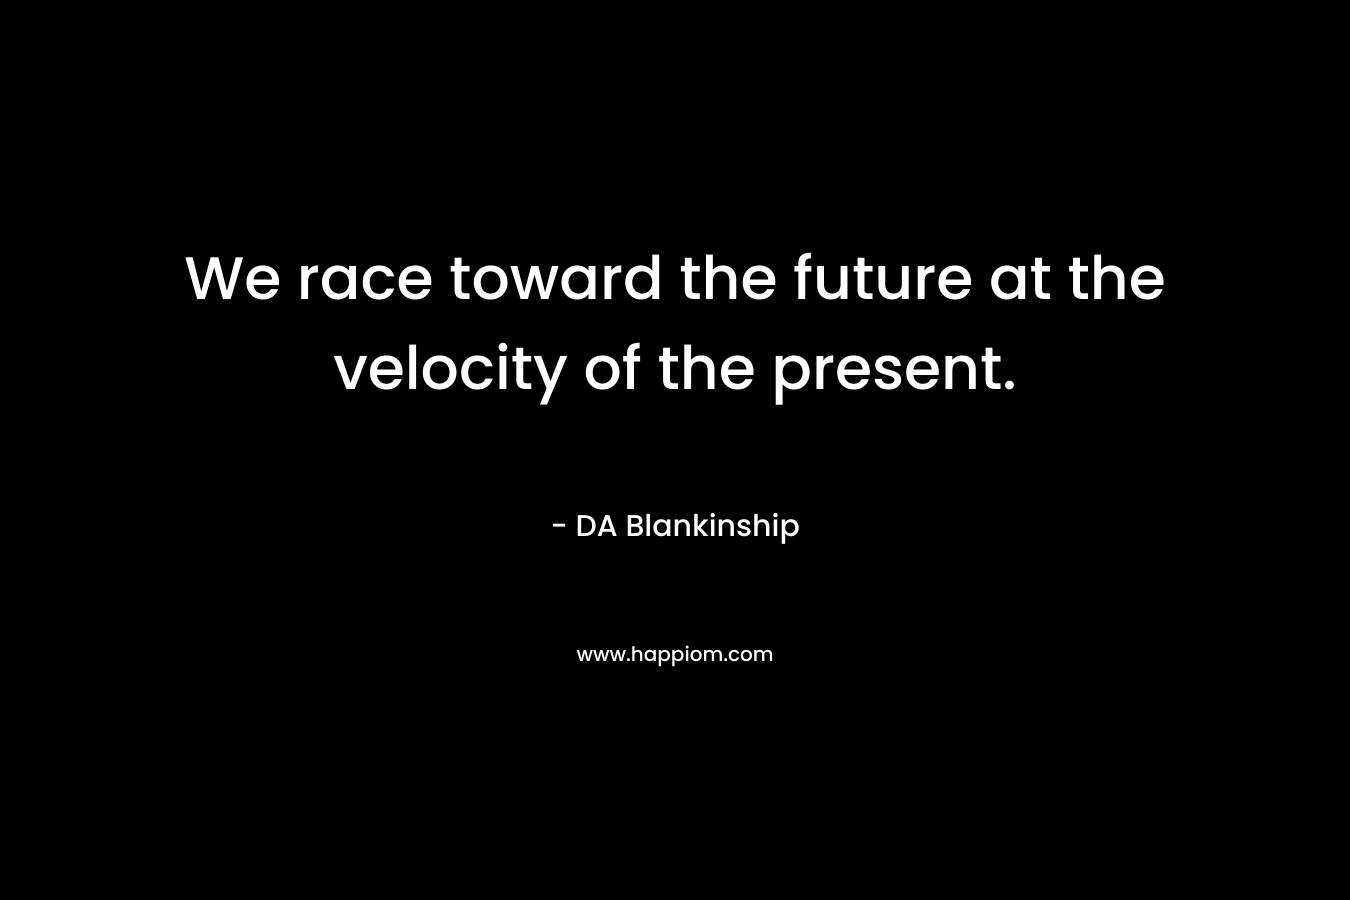 We race toward the future at the velocity of the present.